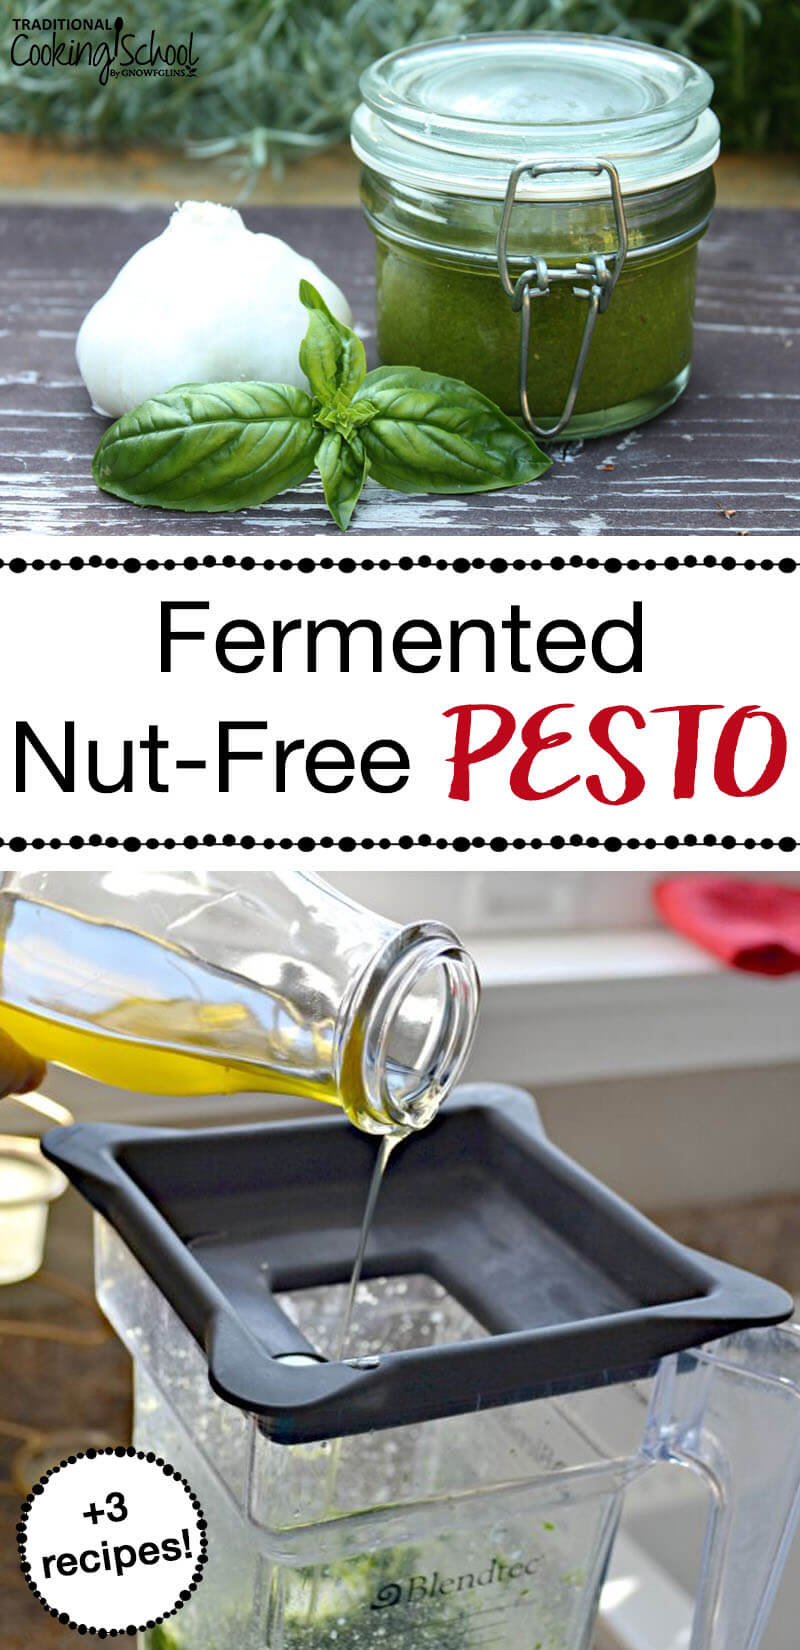 fermented-nut-free-pesto-3-recipes-traditional-cooking-school